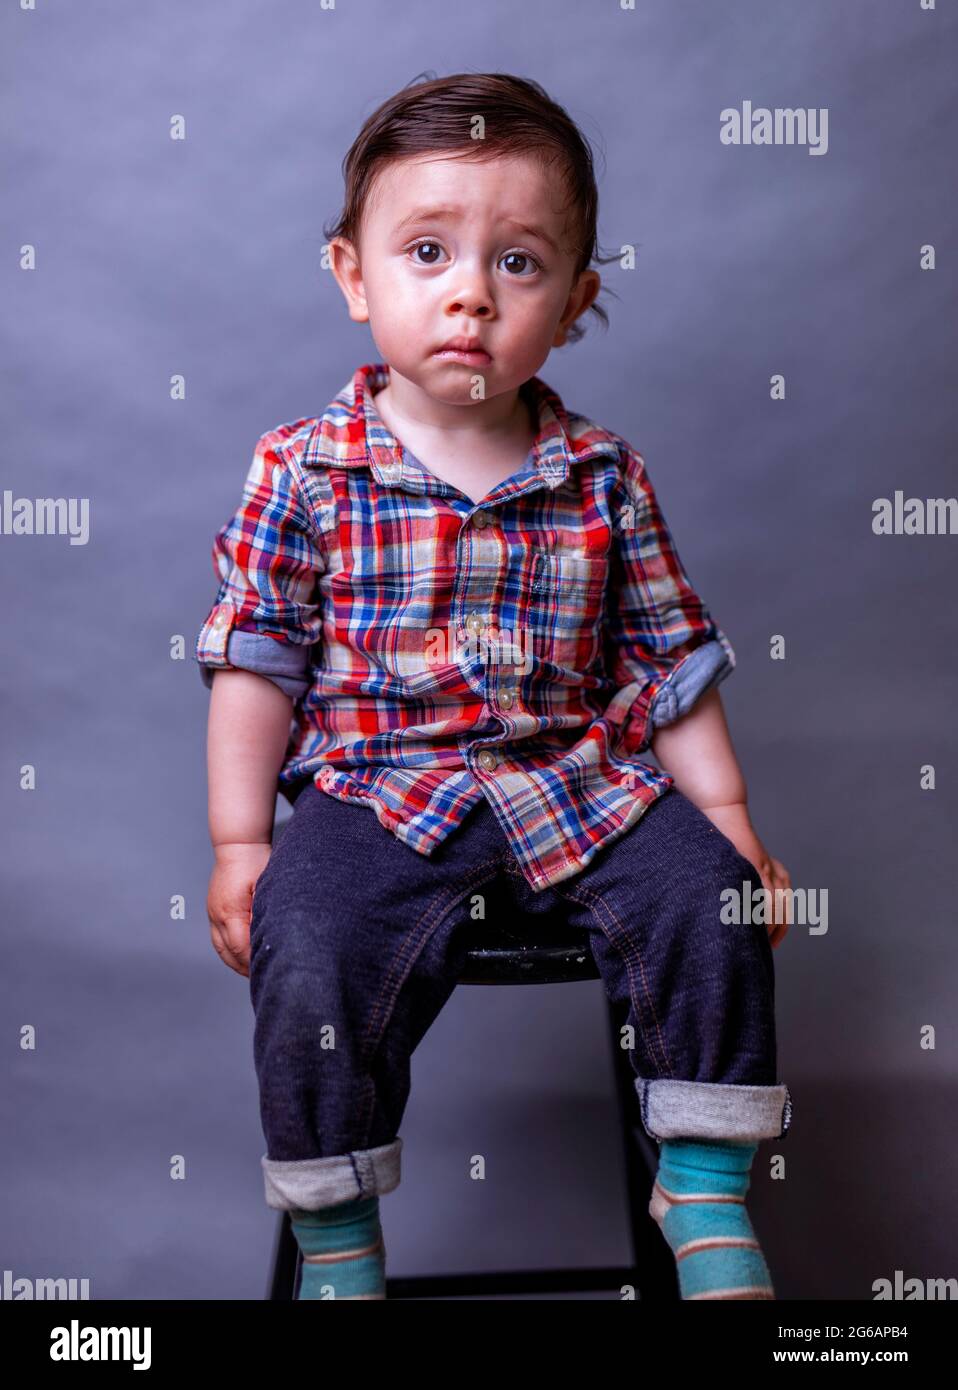 portrait of cute but serious toddler boy wearing plaid shirt and blue jeans Stock Photo